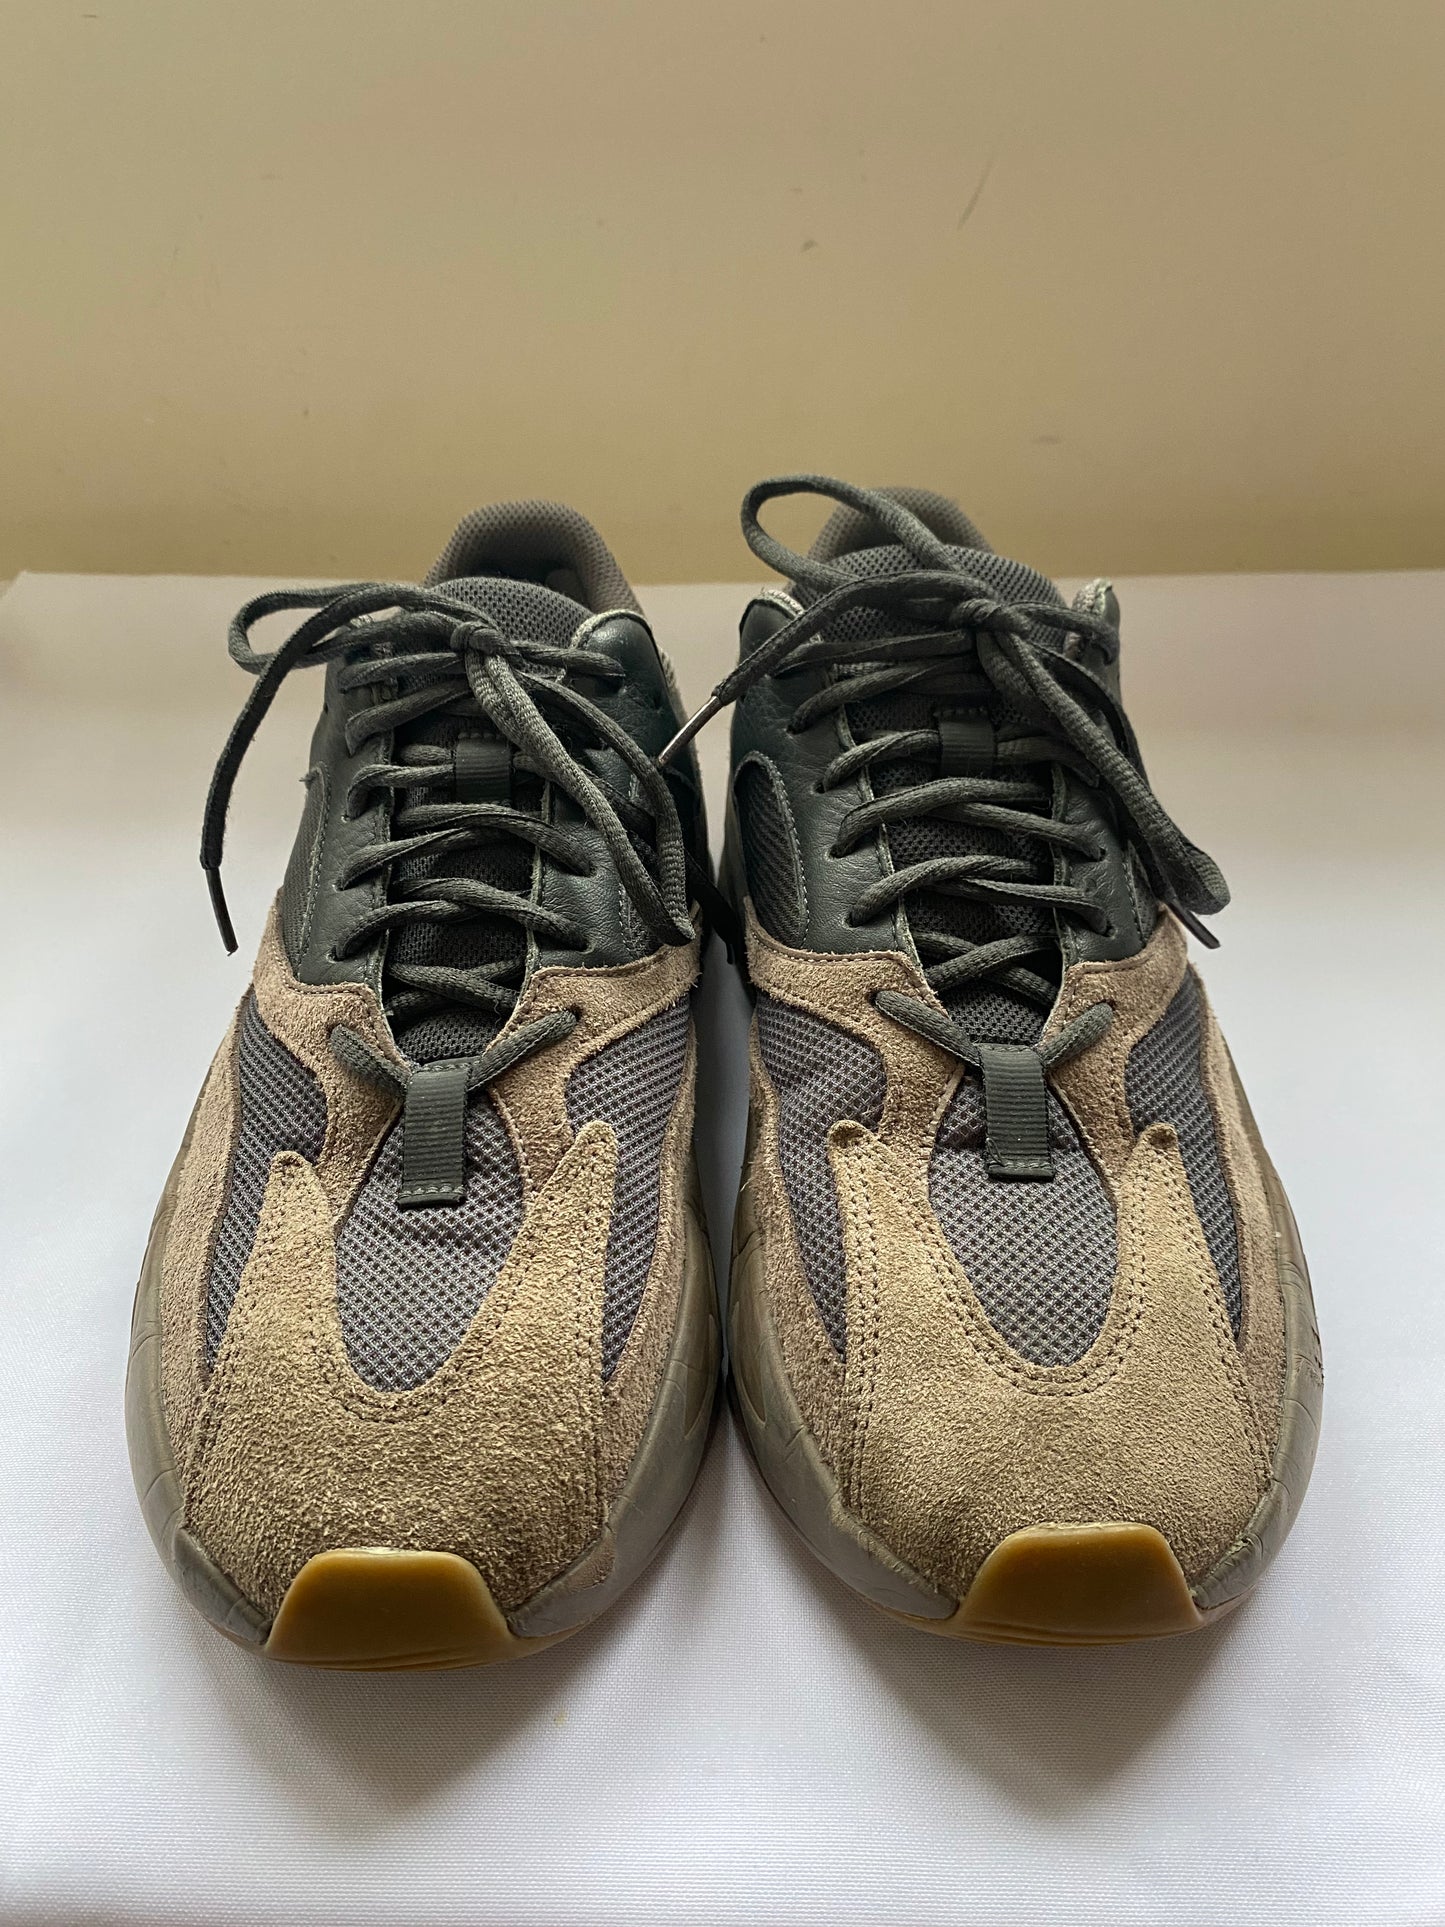 Adidas Yeezy Boost 700 Mauve Shoes (Size 11)